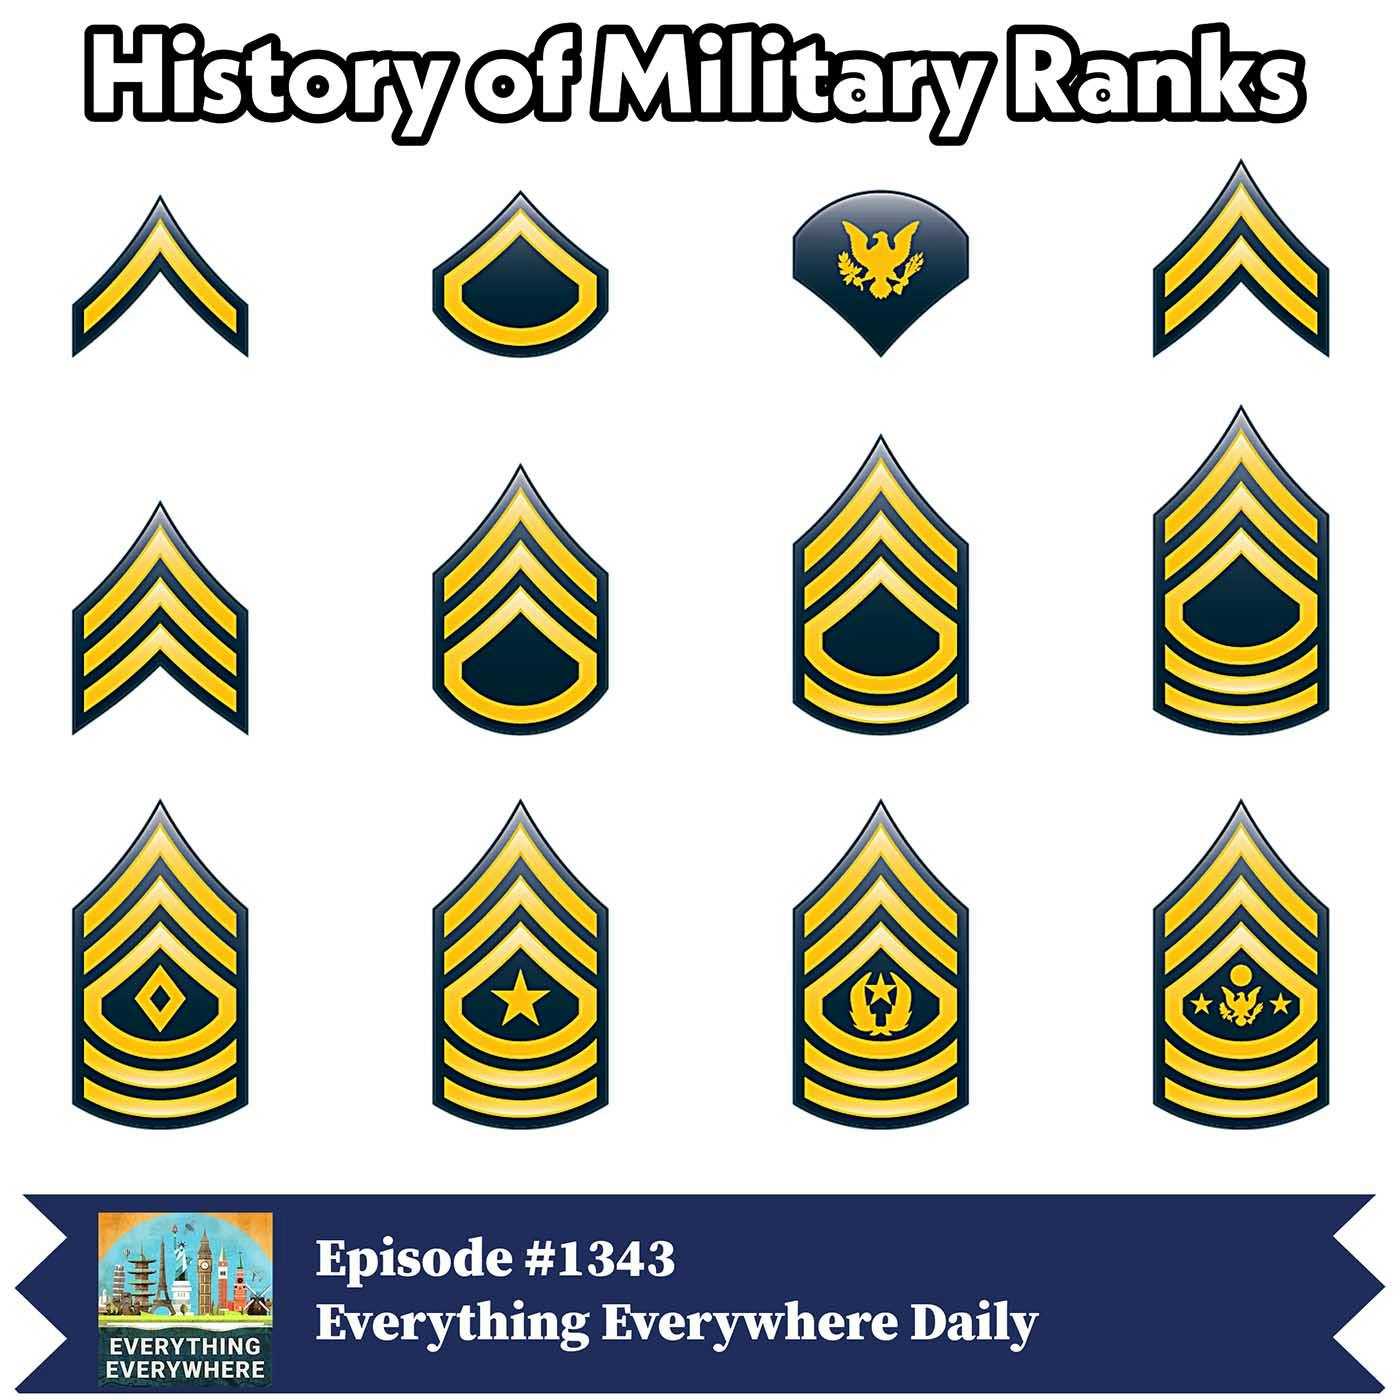 The History of Military Ranks